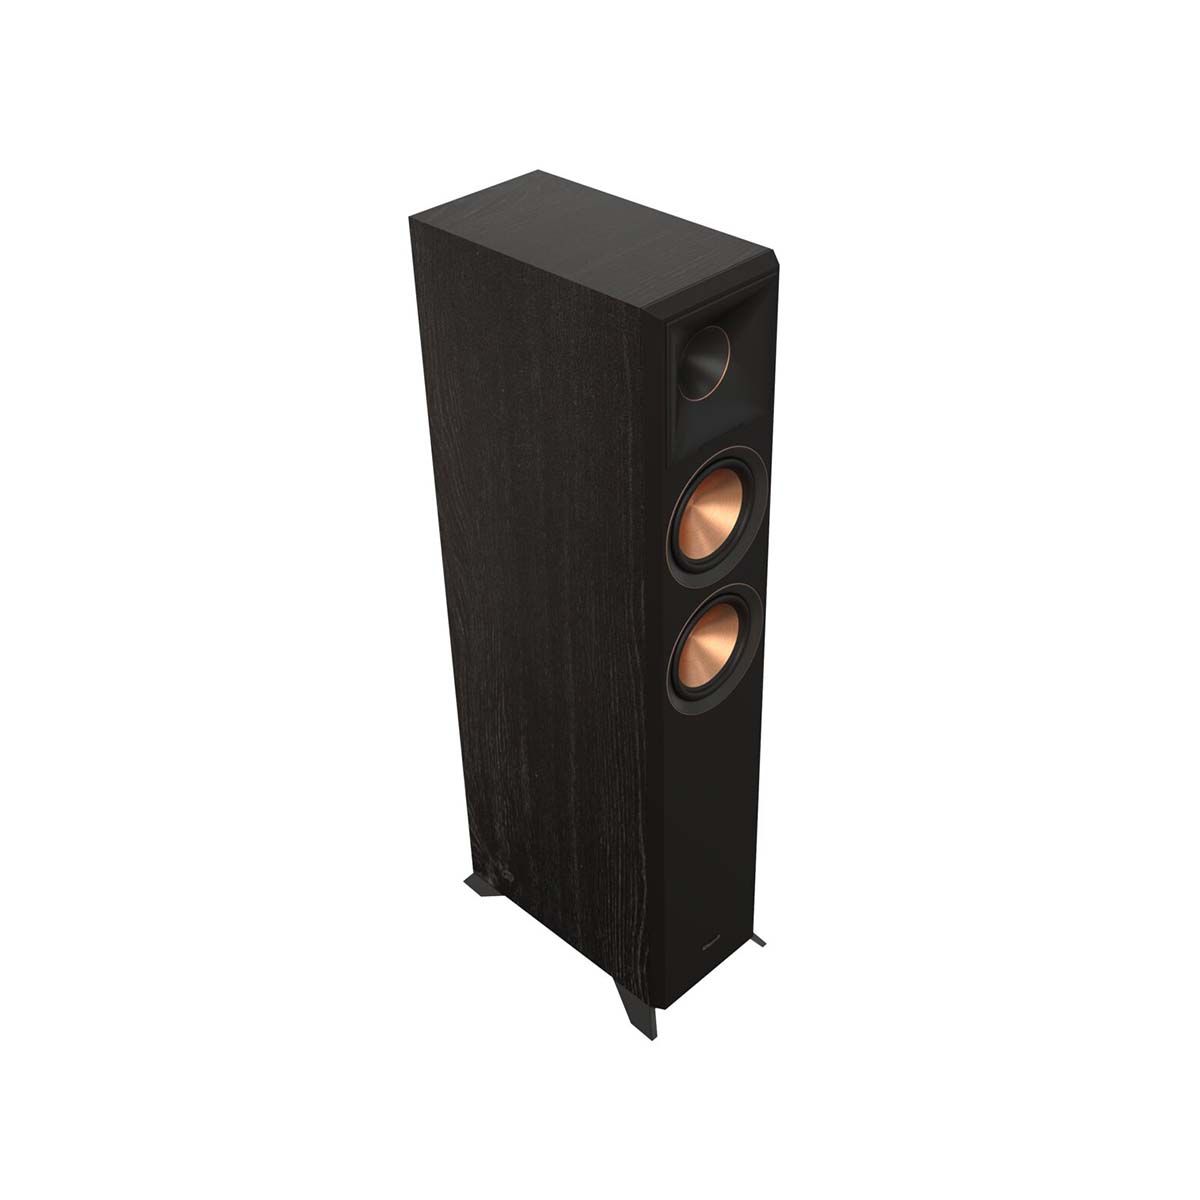 Klipsch RP-5000F II Floorstanding Speaker - Ebony - angled front view without grill